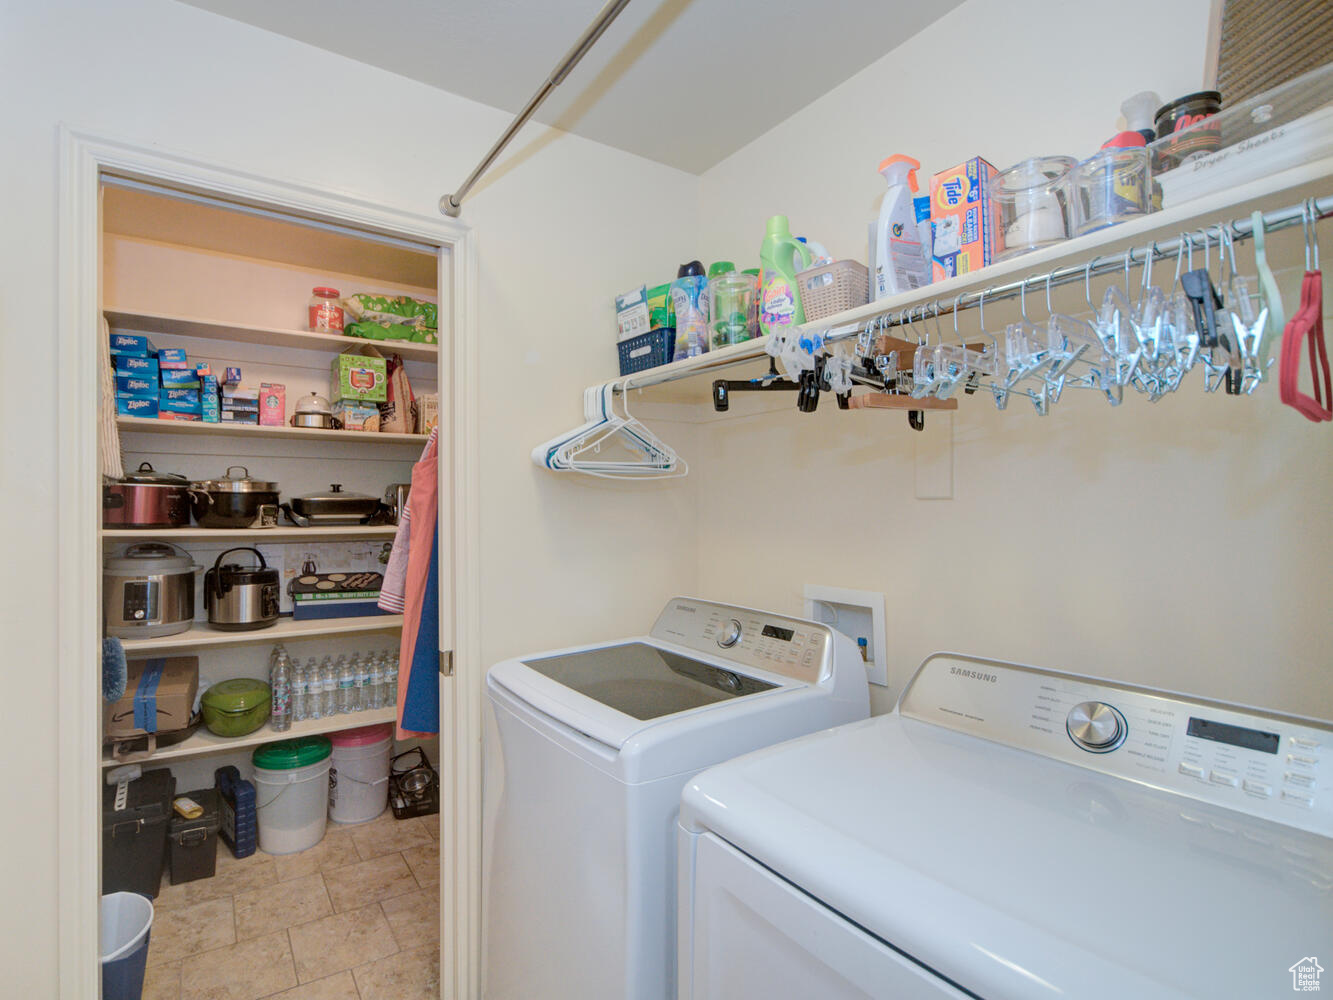 LAUNDRY ROOM AND LARGE WALK-IN PANTRY